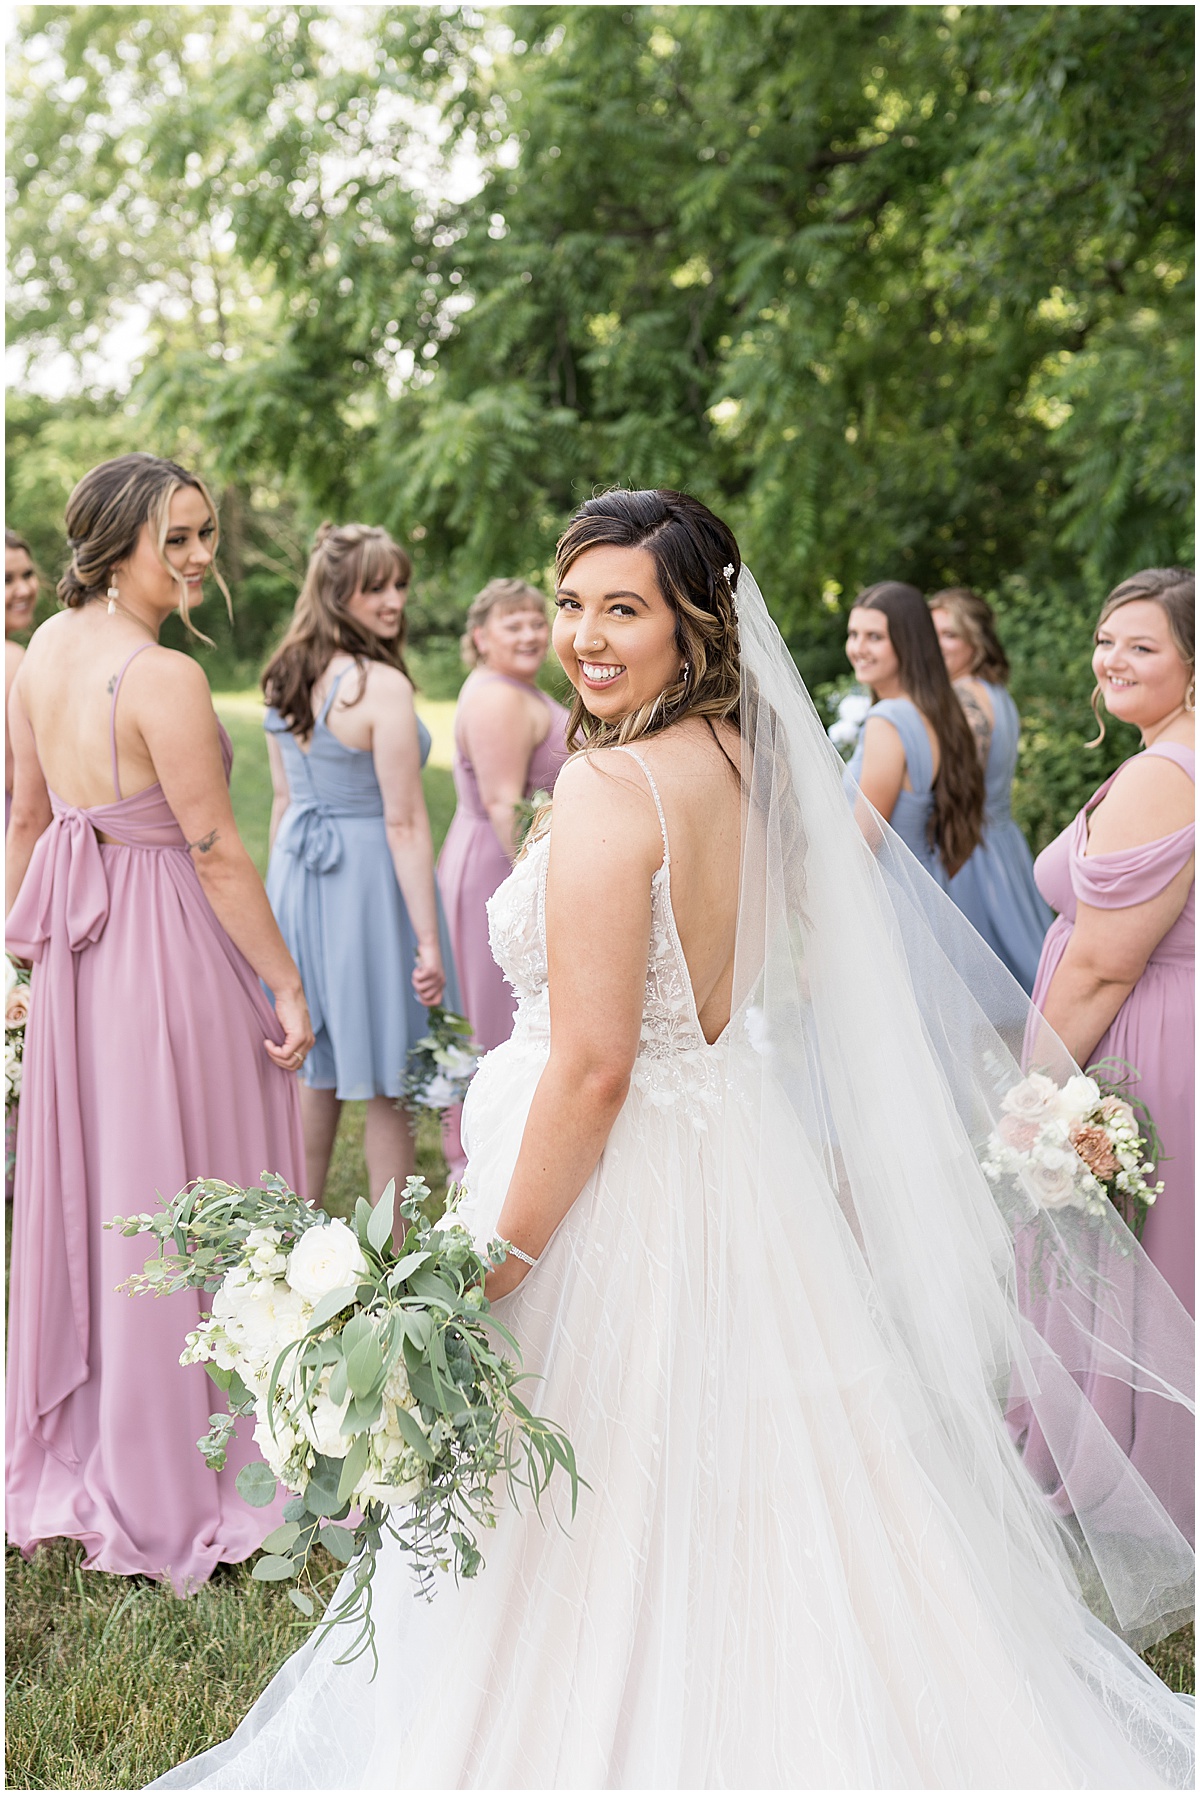 Bride shows back of dress walking with bridesmaids at Stables Event Center wedding in Lafayette, Indiana